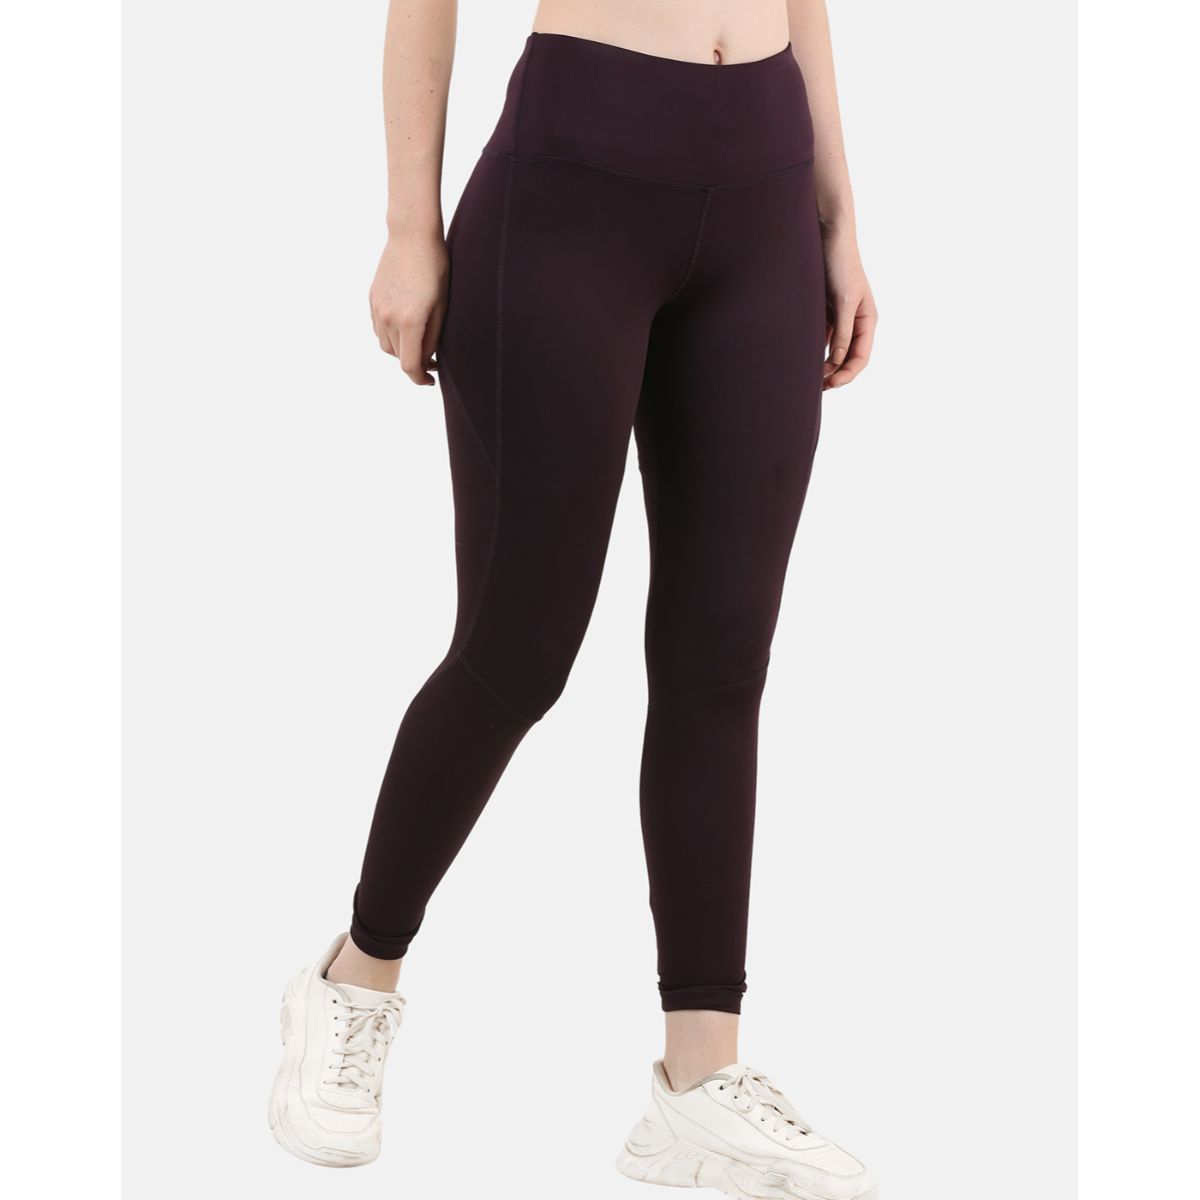 Buy Mehrang Stretchable Yoga Pants for Women  Gym Pants for Women Workout  with Mesh Insert  Side Pockets S Black at Amazonin